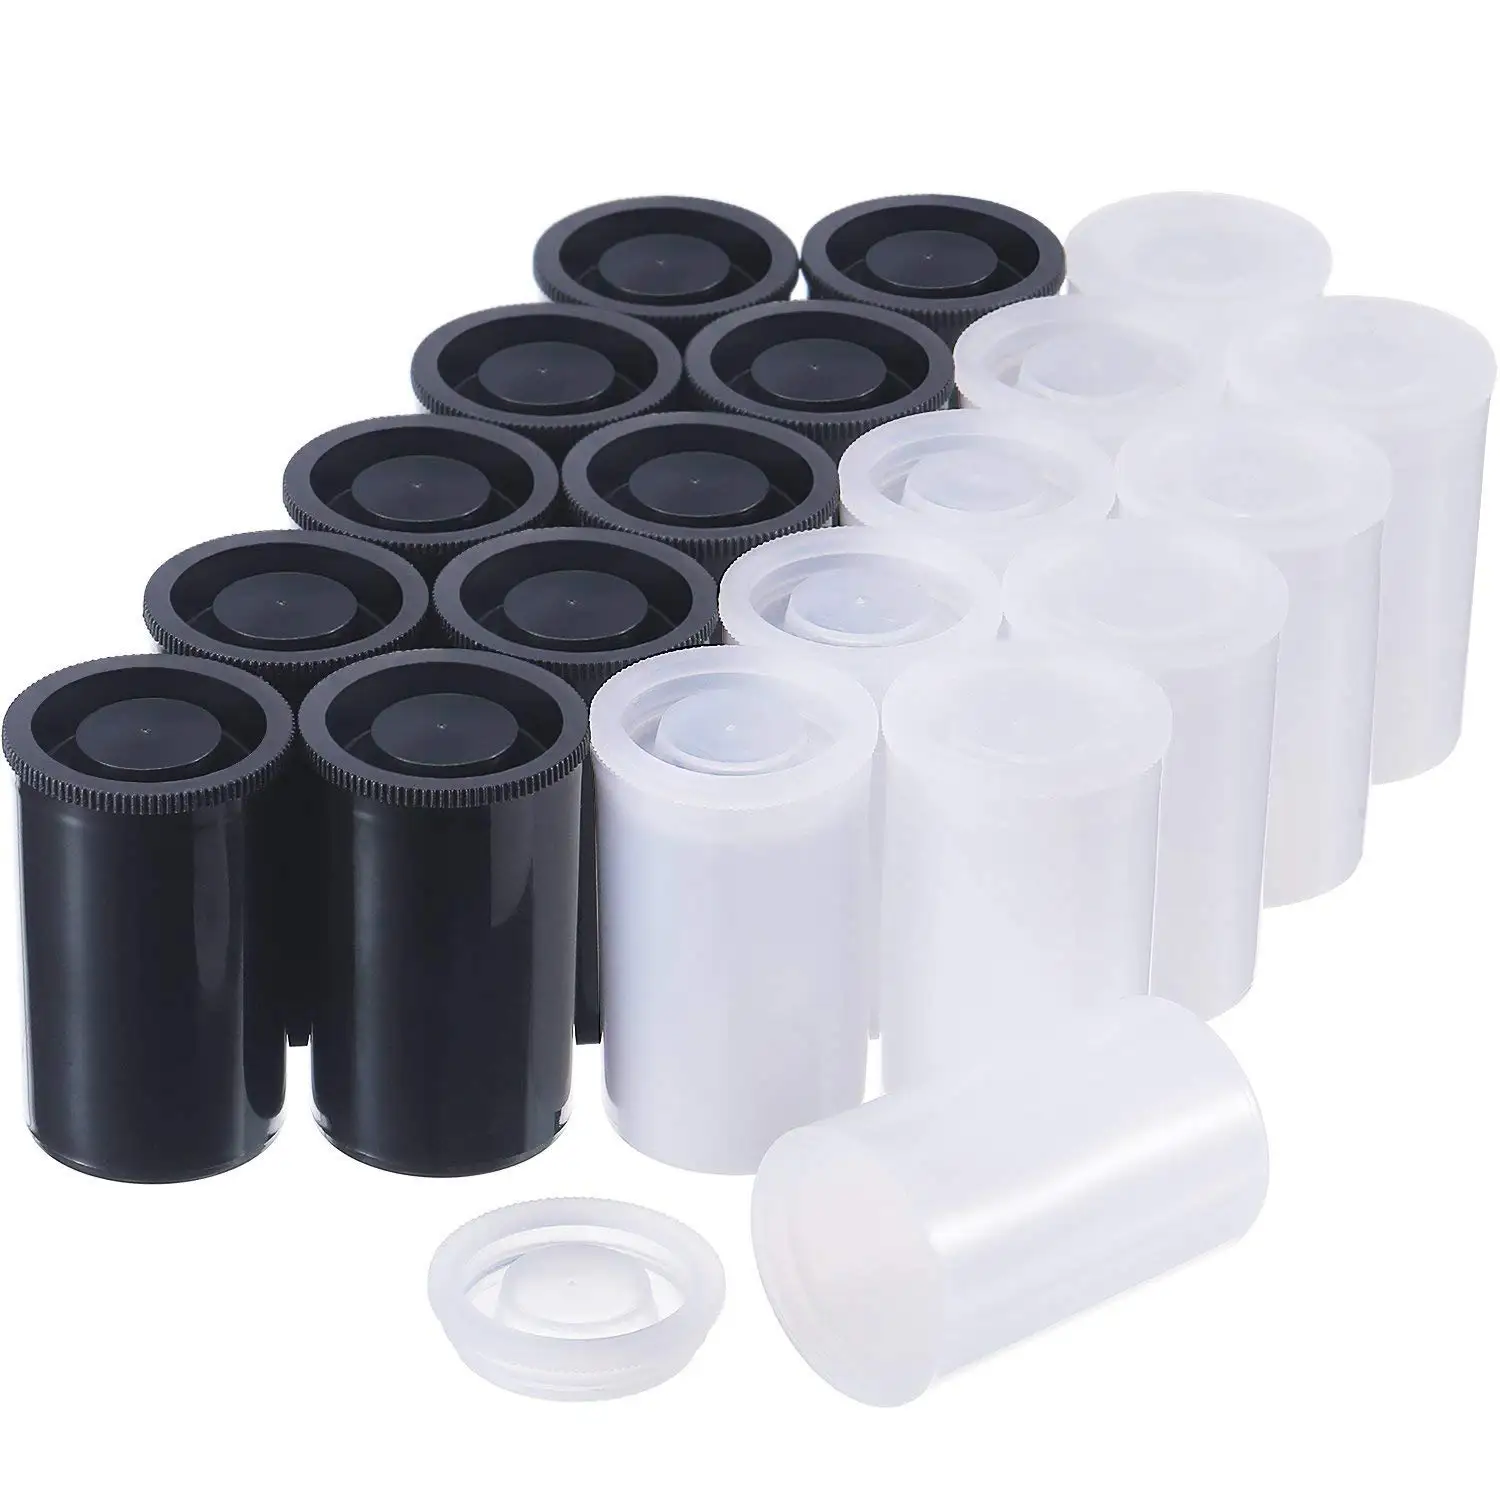 50PCS X 33MM Plastic Empty Film Canister Camera Reel Container Storage Case Can for Accessories Art Beads Coin Pill Fishing Bait